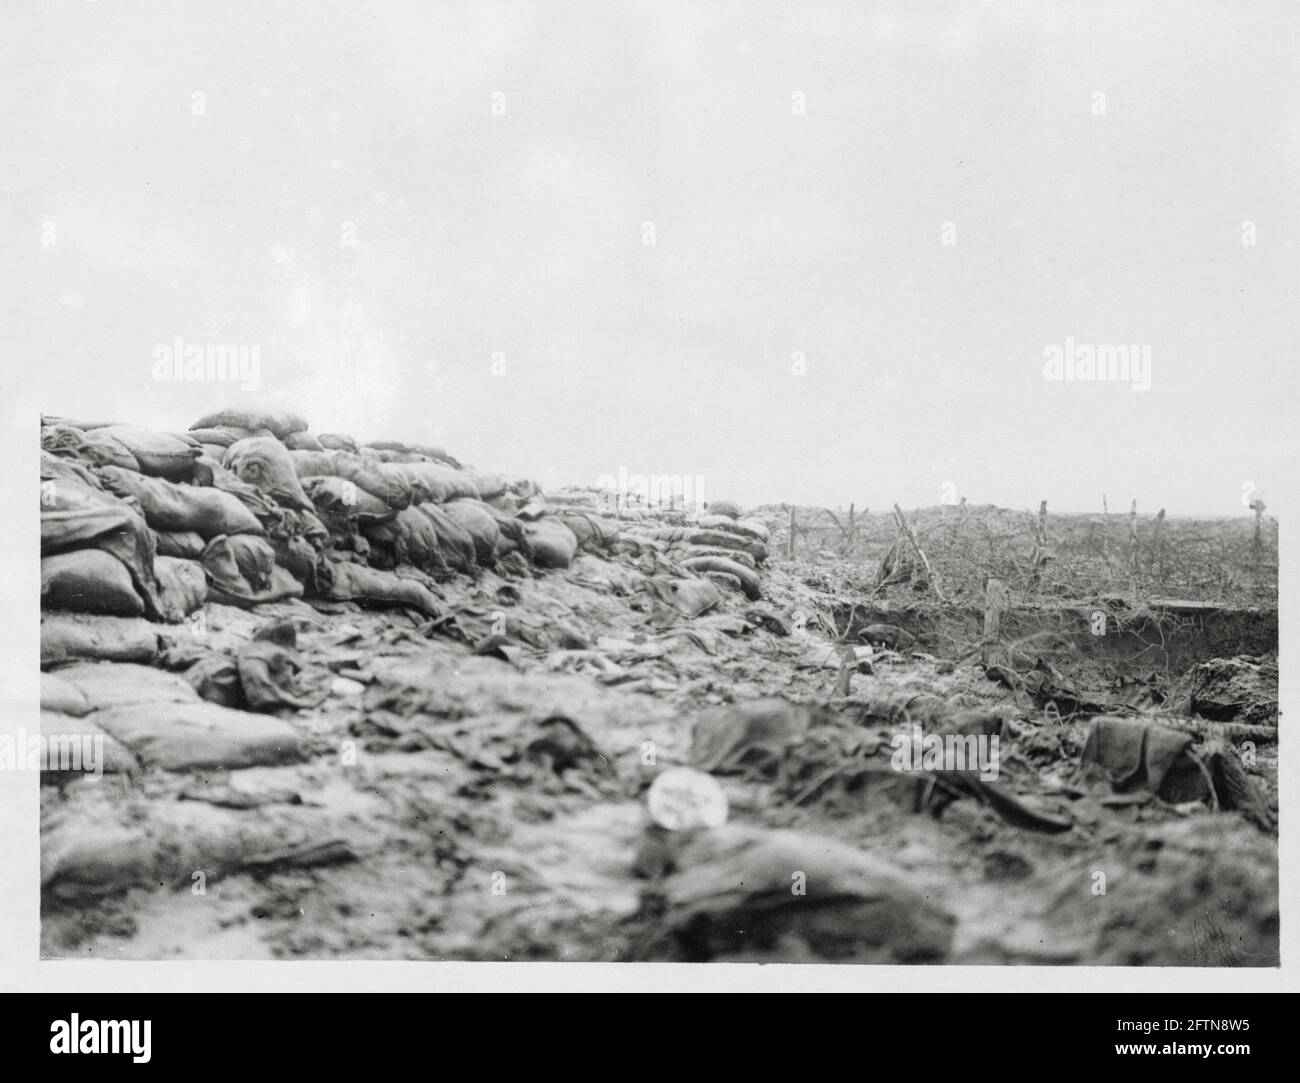 World War One, WWI, Western Front - A front line trench with sandbags, mud and barbed wire, France Stock Photo